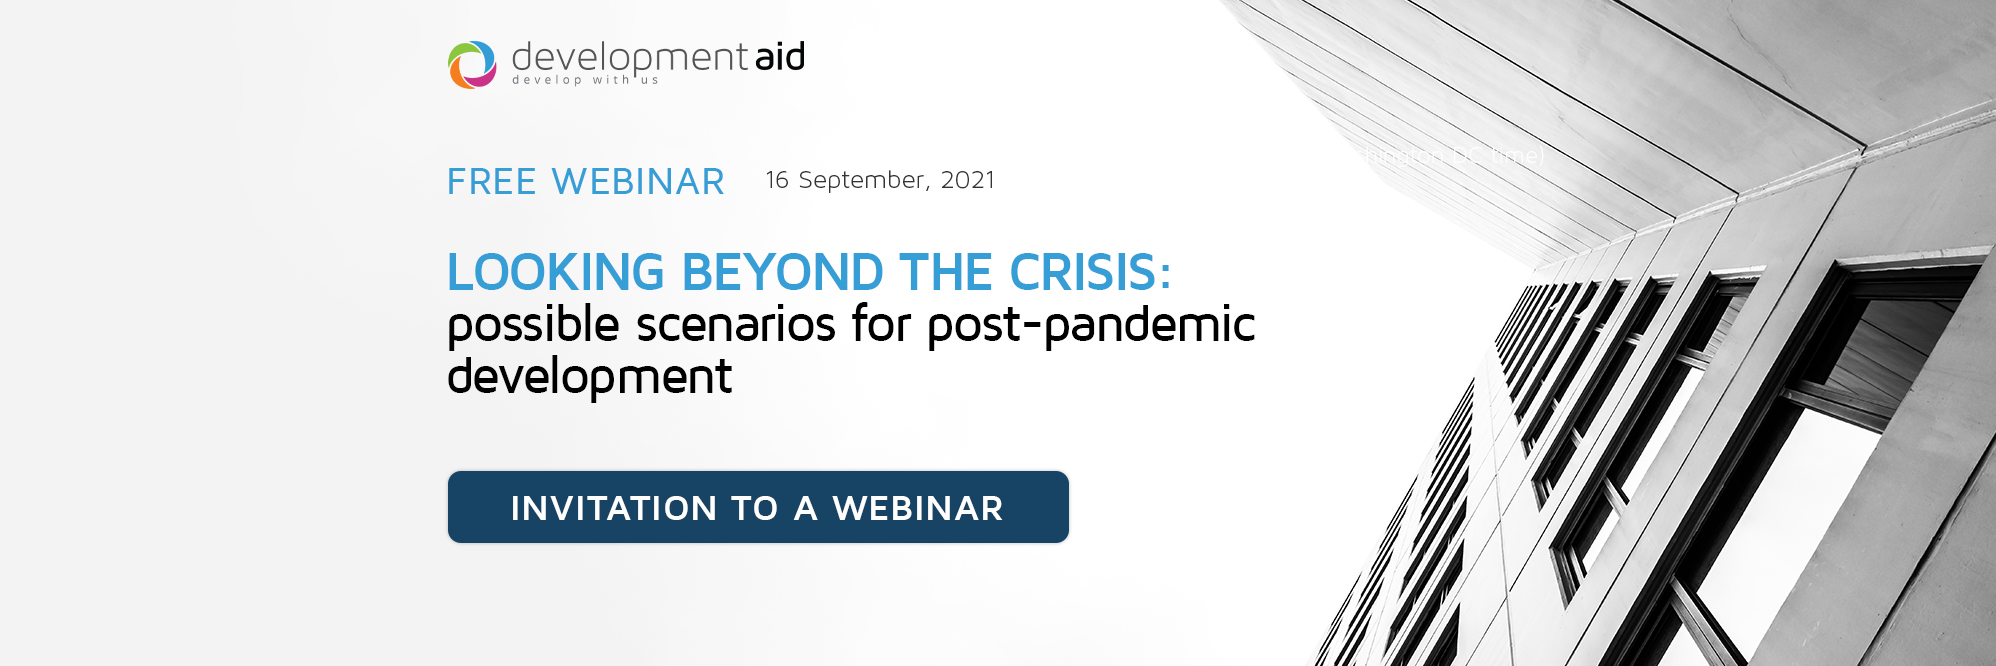 Looking beyond the crisis: possible scenarios for post-pandemic development  | Invitation to a Webinar